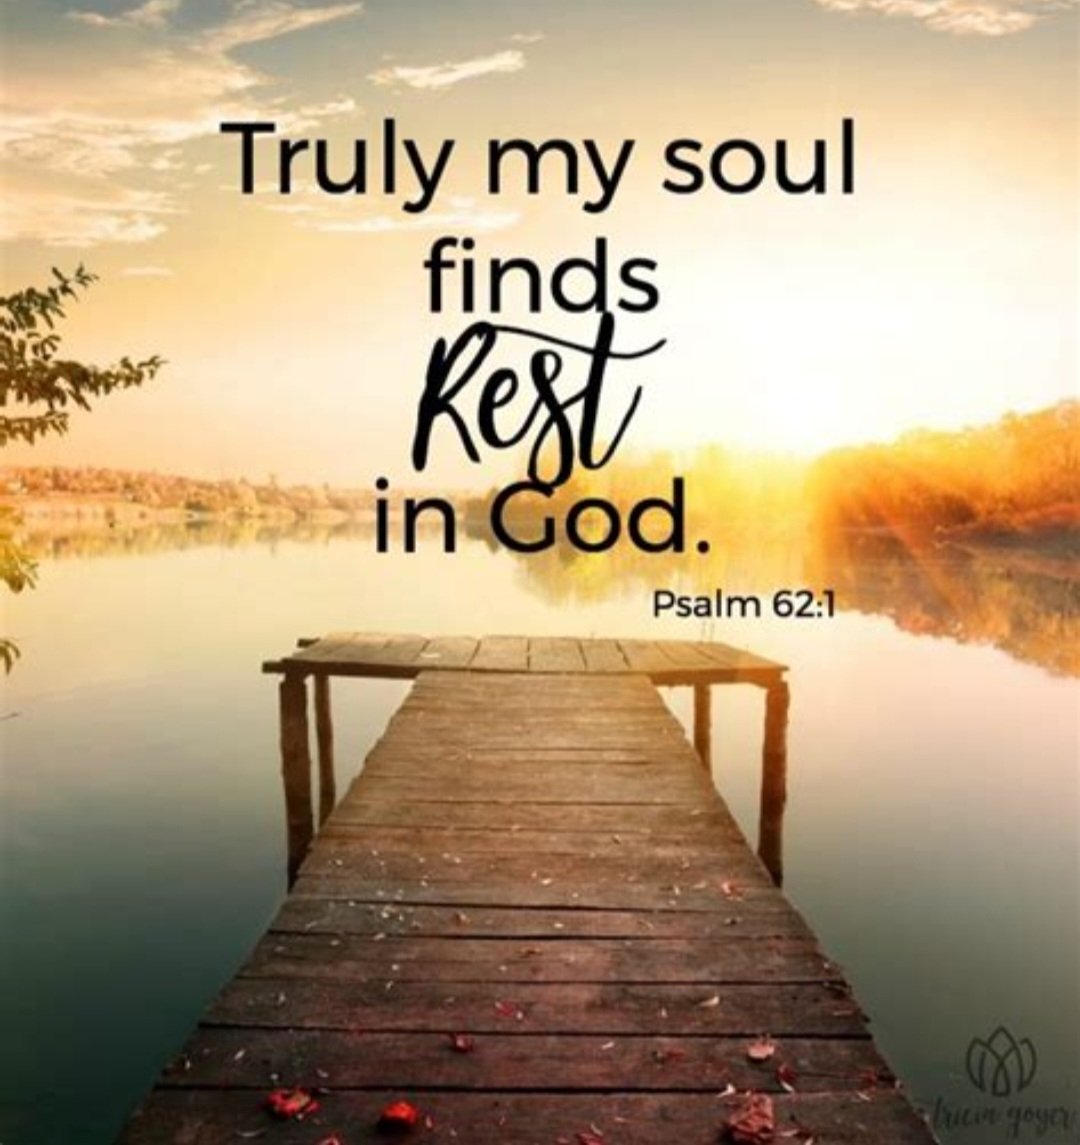 Truly my soul finds rest in God; my salvation comes from him. Psalm 62:1